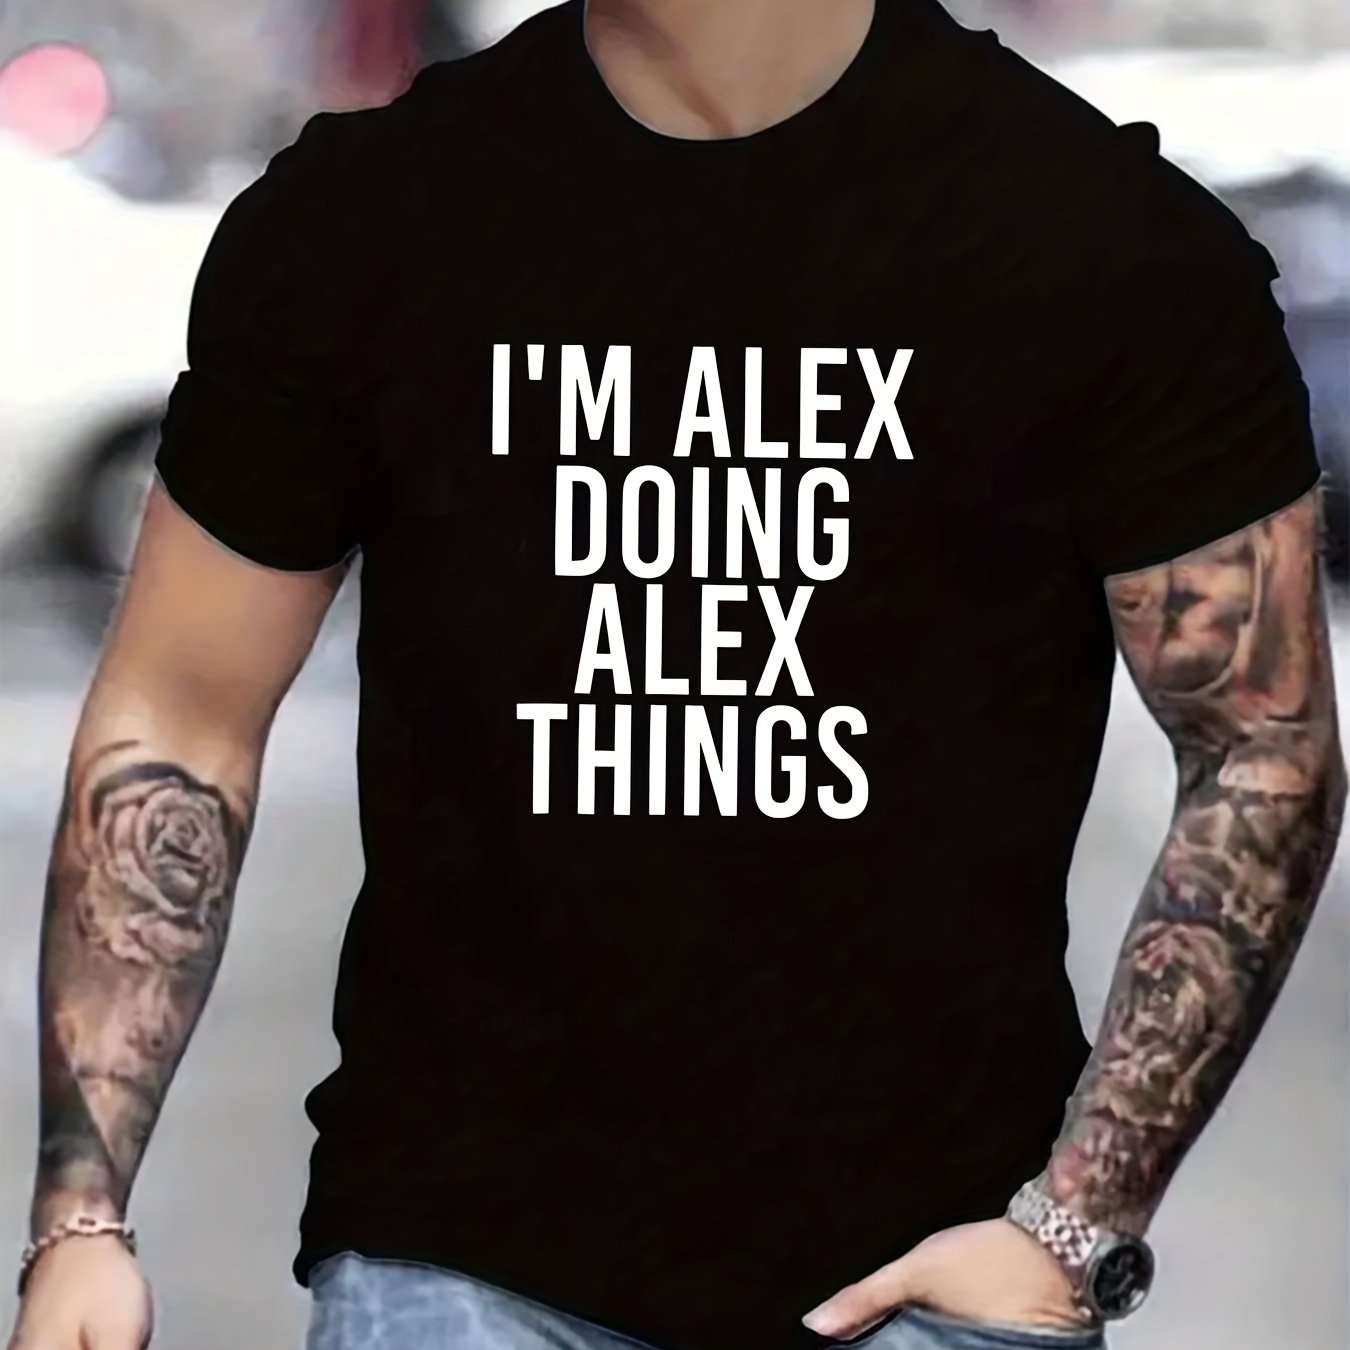 

I Am Alex Doing Alex Thing Print Men's Round Neck Short Sleeve Tee Fashion Regular Fit T-shirt Top For Spring Summer Holiday